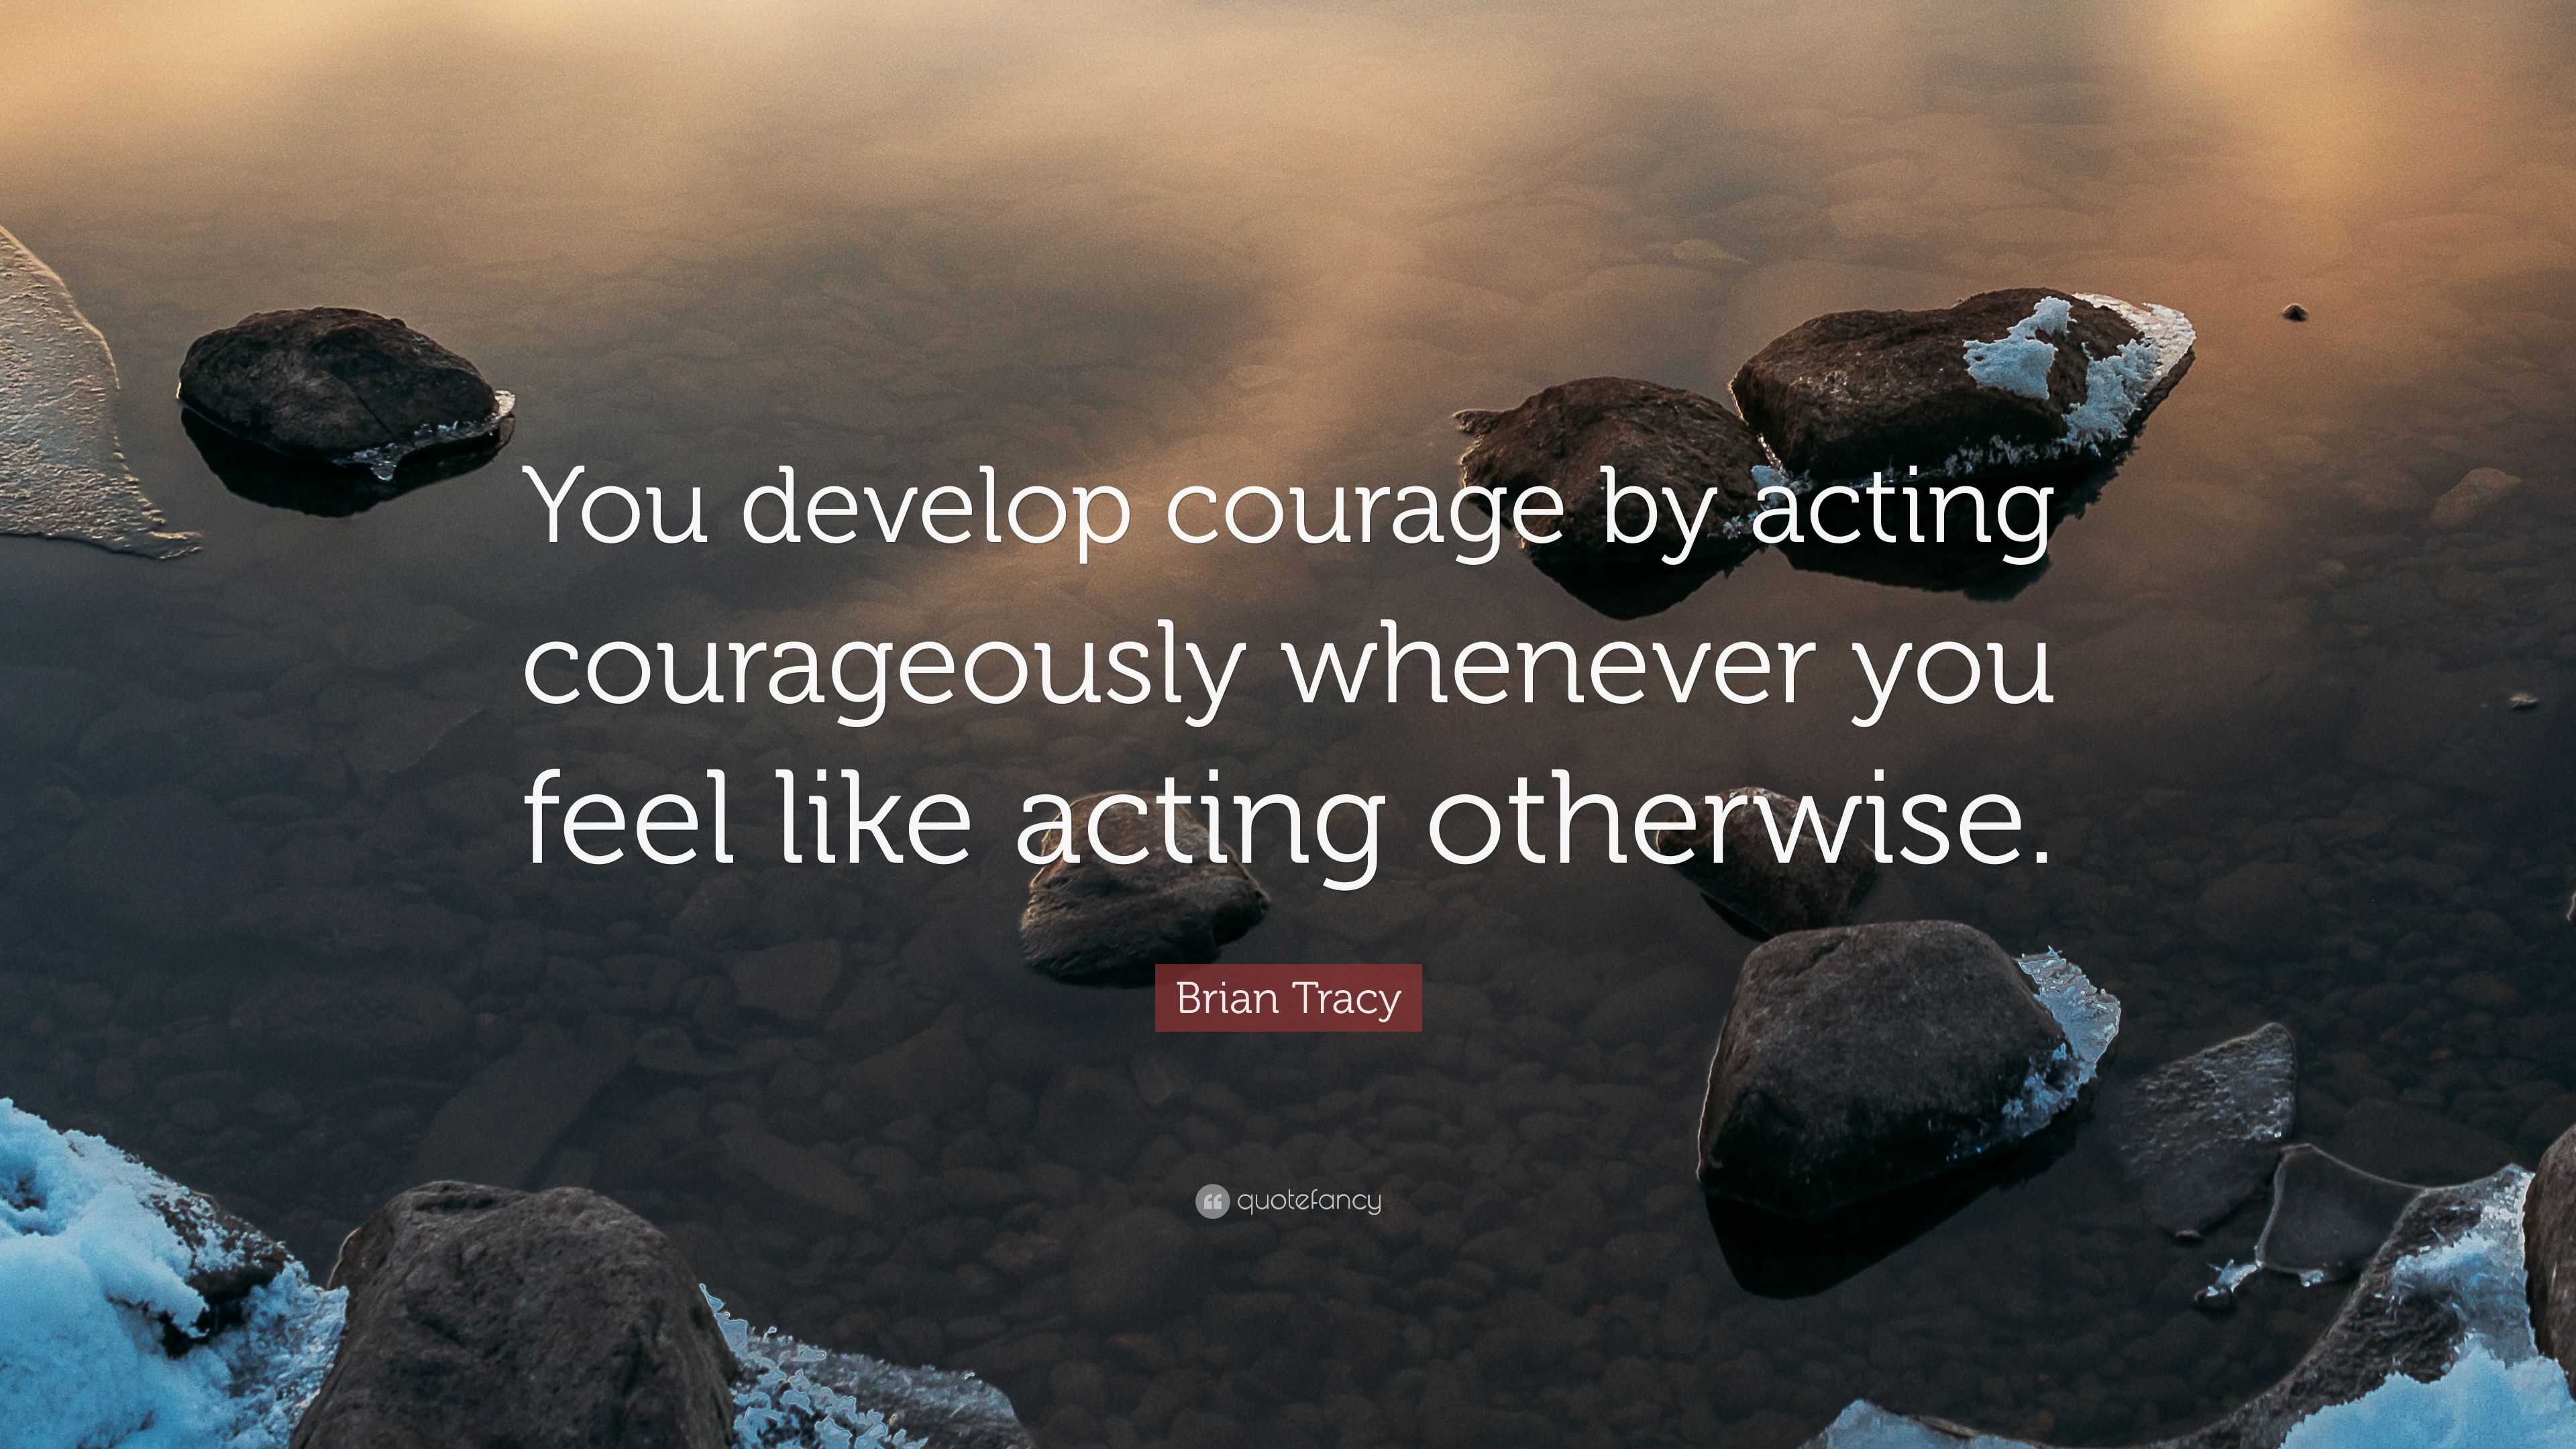 Brian Tracy Quote: “You develop courage by acting courageously whenever ...